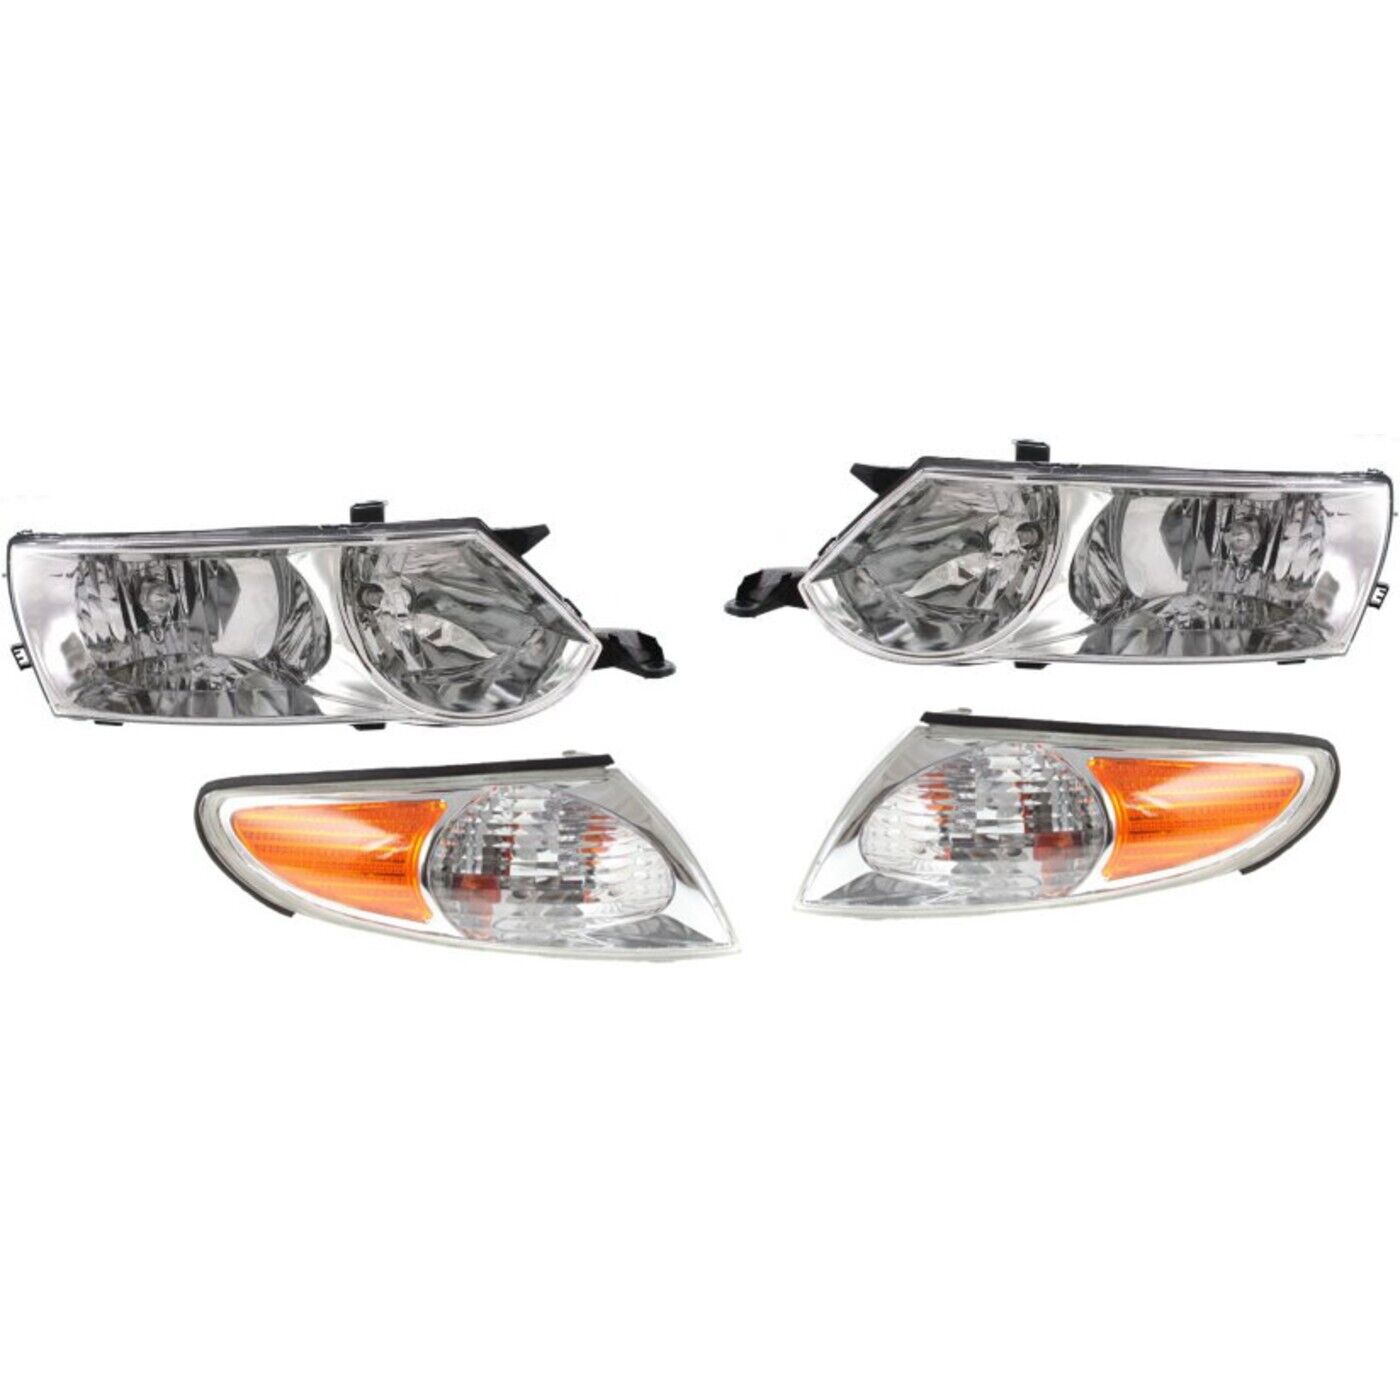 Headlight Kit For 2002-2003 Toyota Solara Left and Right With Corner Lights